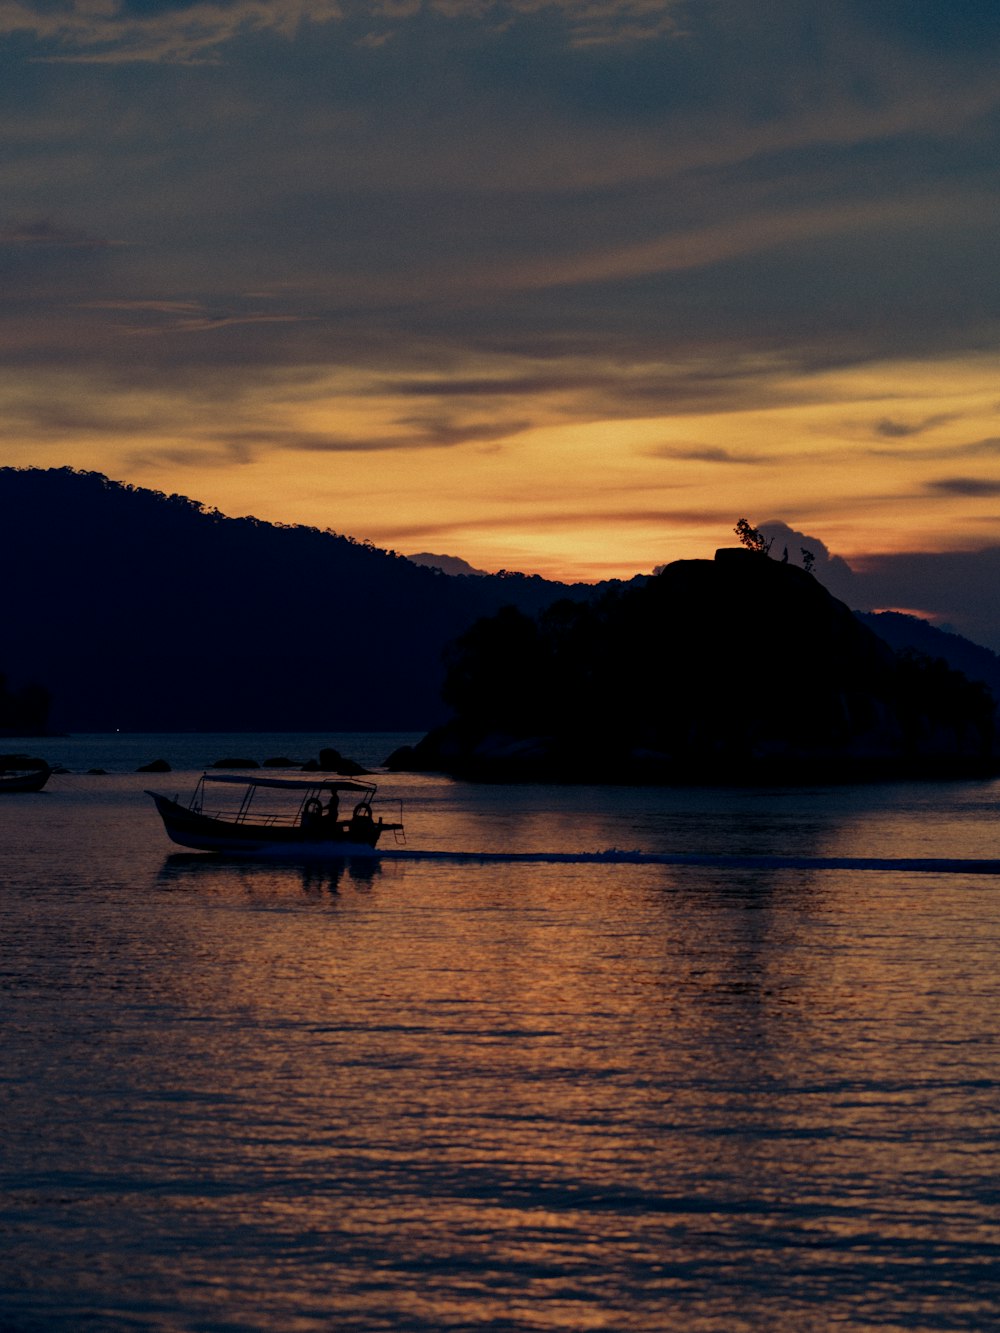 silhouette of boat on body of water during sunset